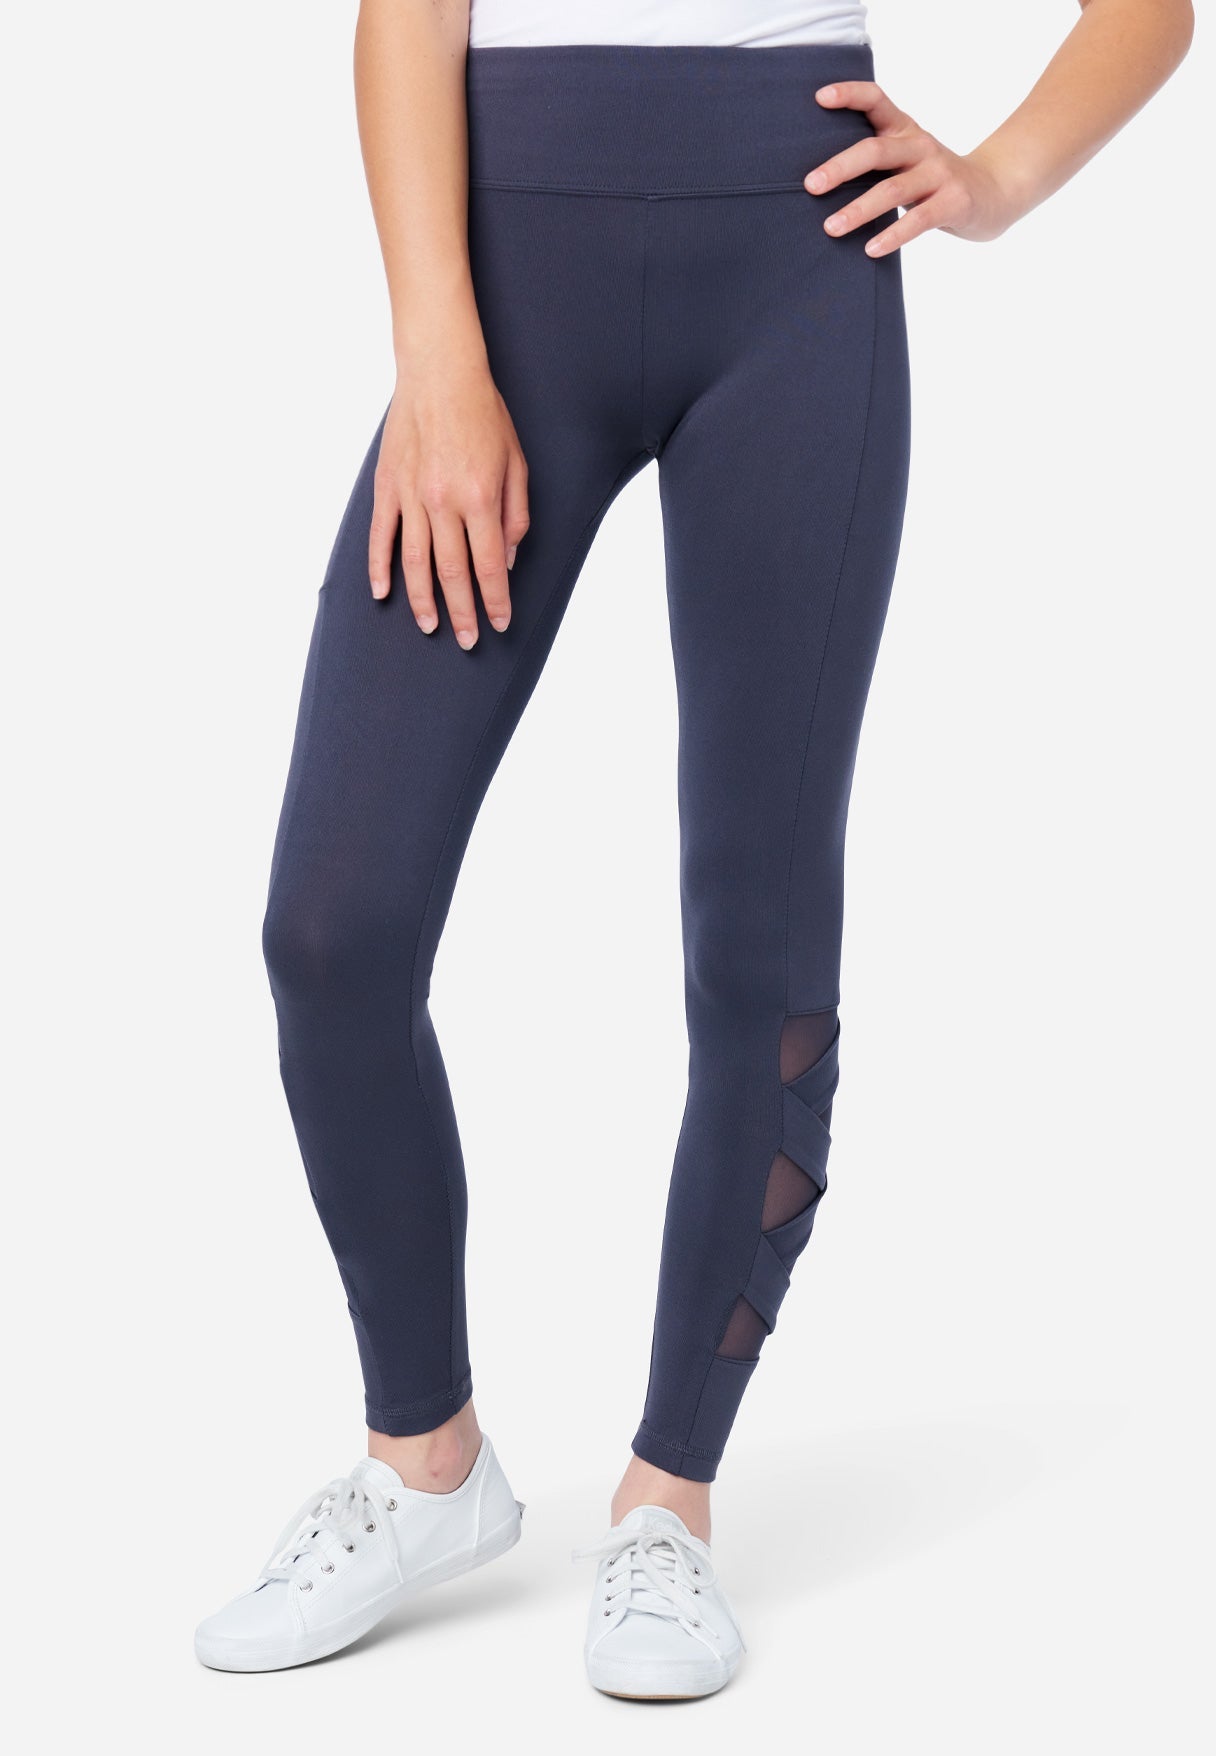 Justice Leggings - Cyber – Polyverse Forge